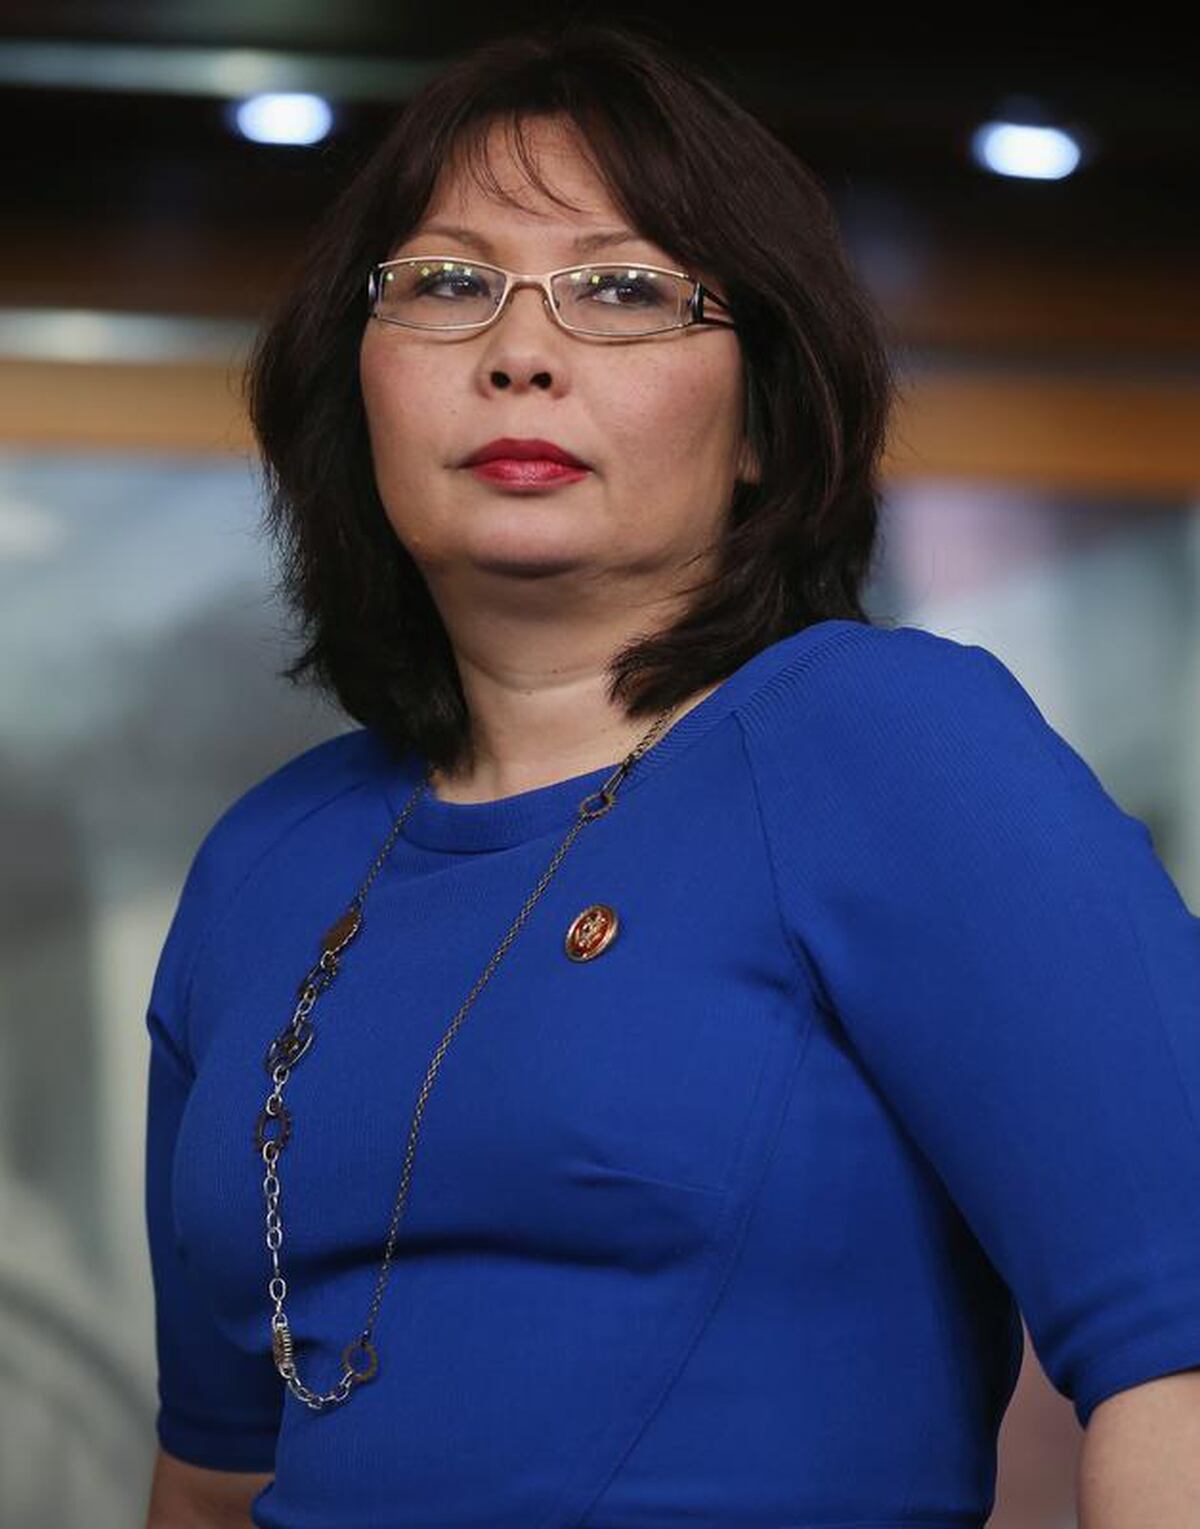 Duckworth to be first sitting US senator to give birth